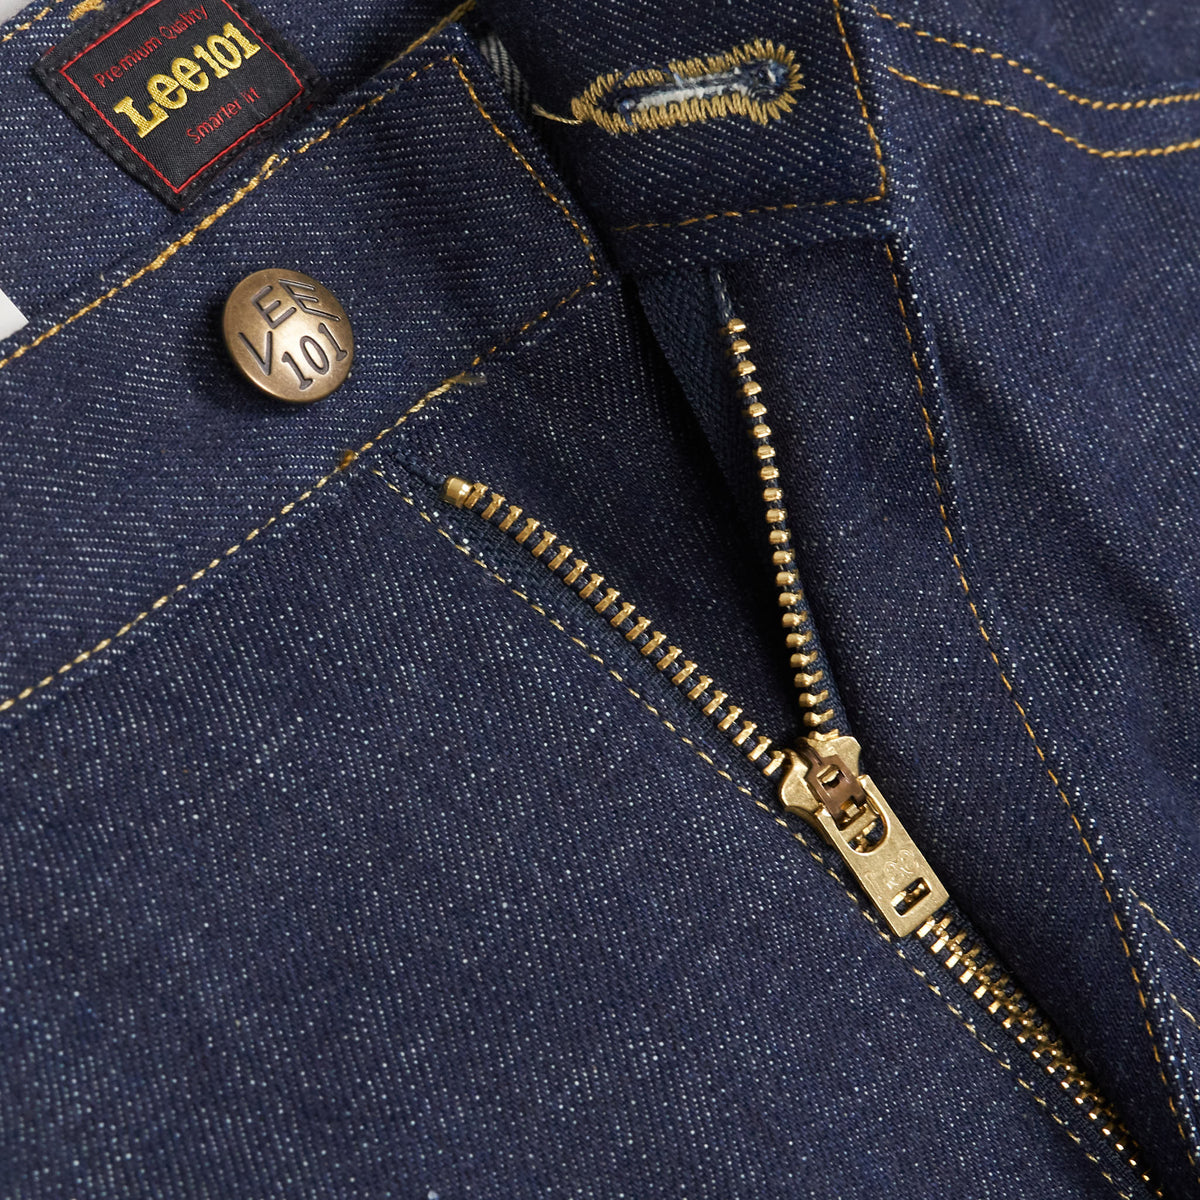 Lee 101 50s Rider Jeans